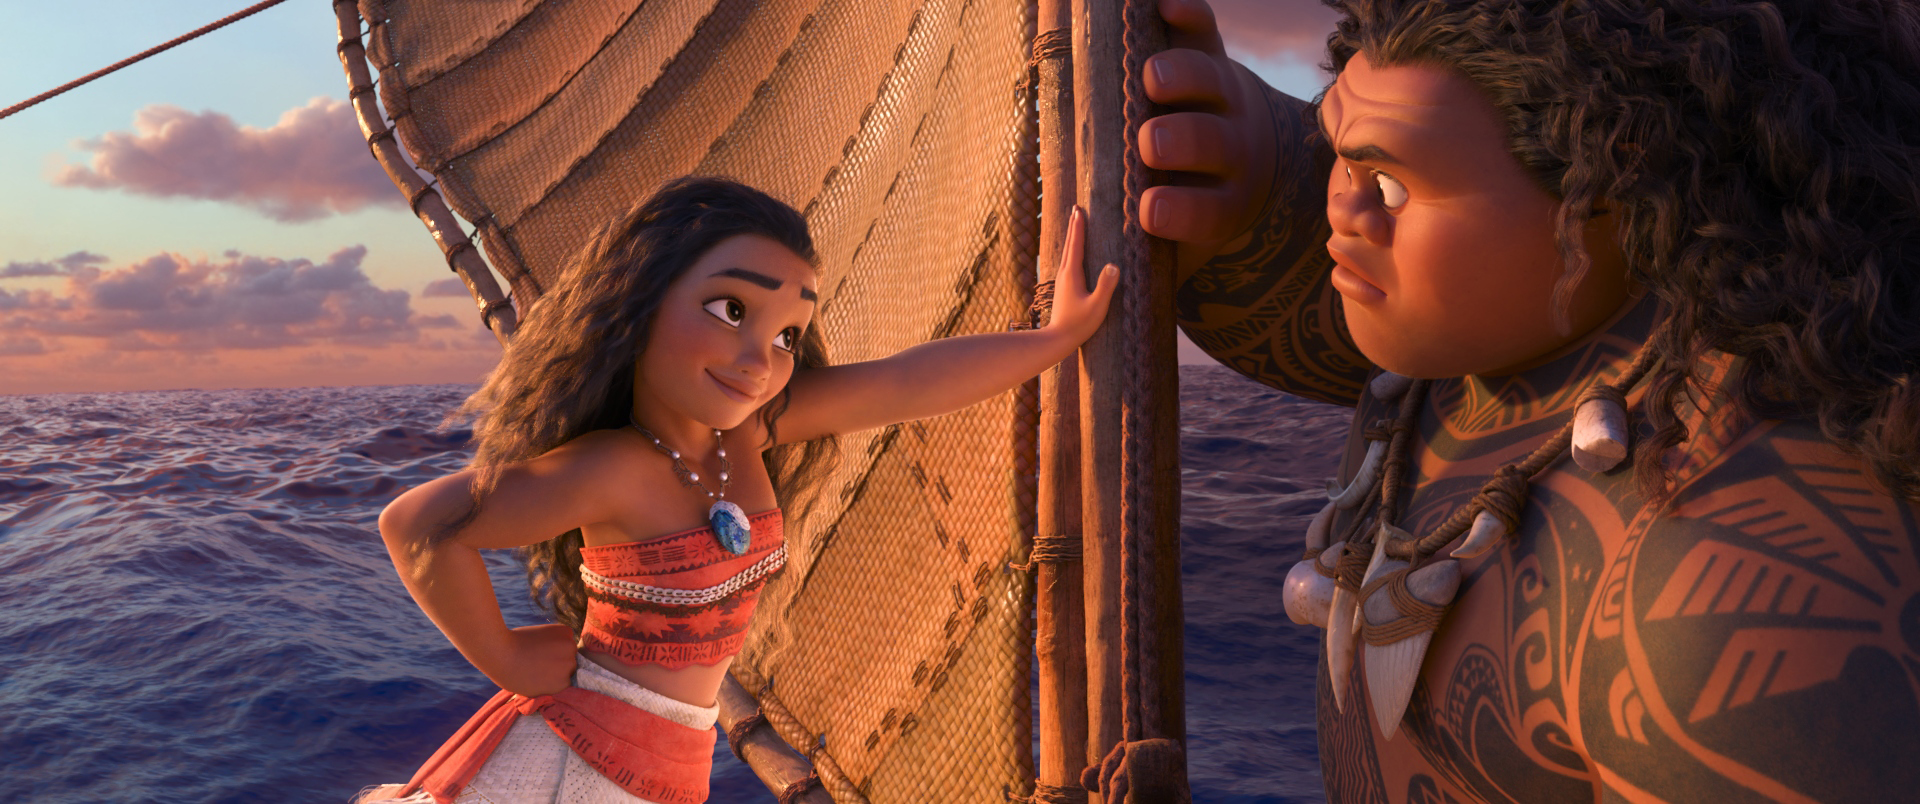 Check out the Newest Moana Trailer!